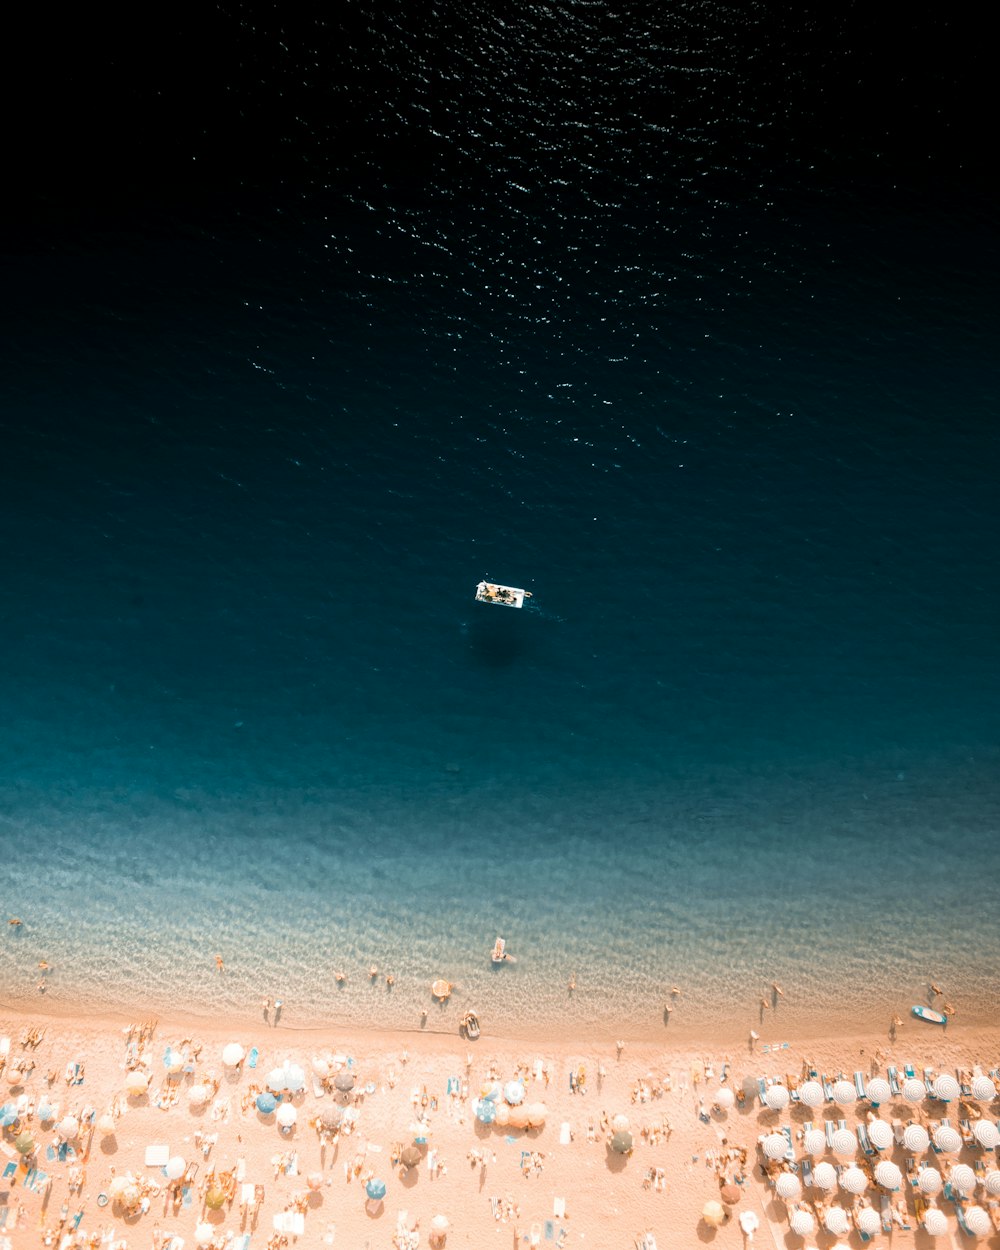 boat on body of water